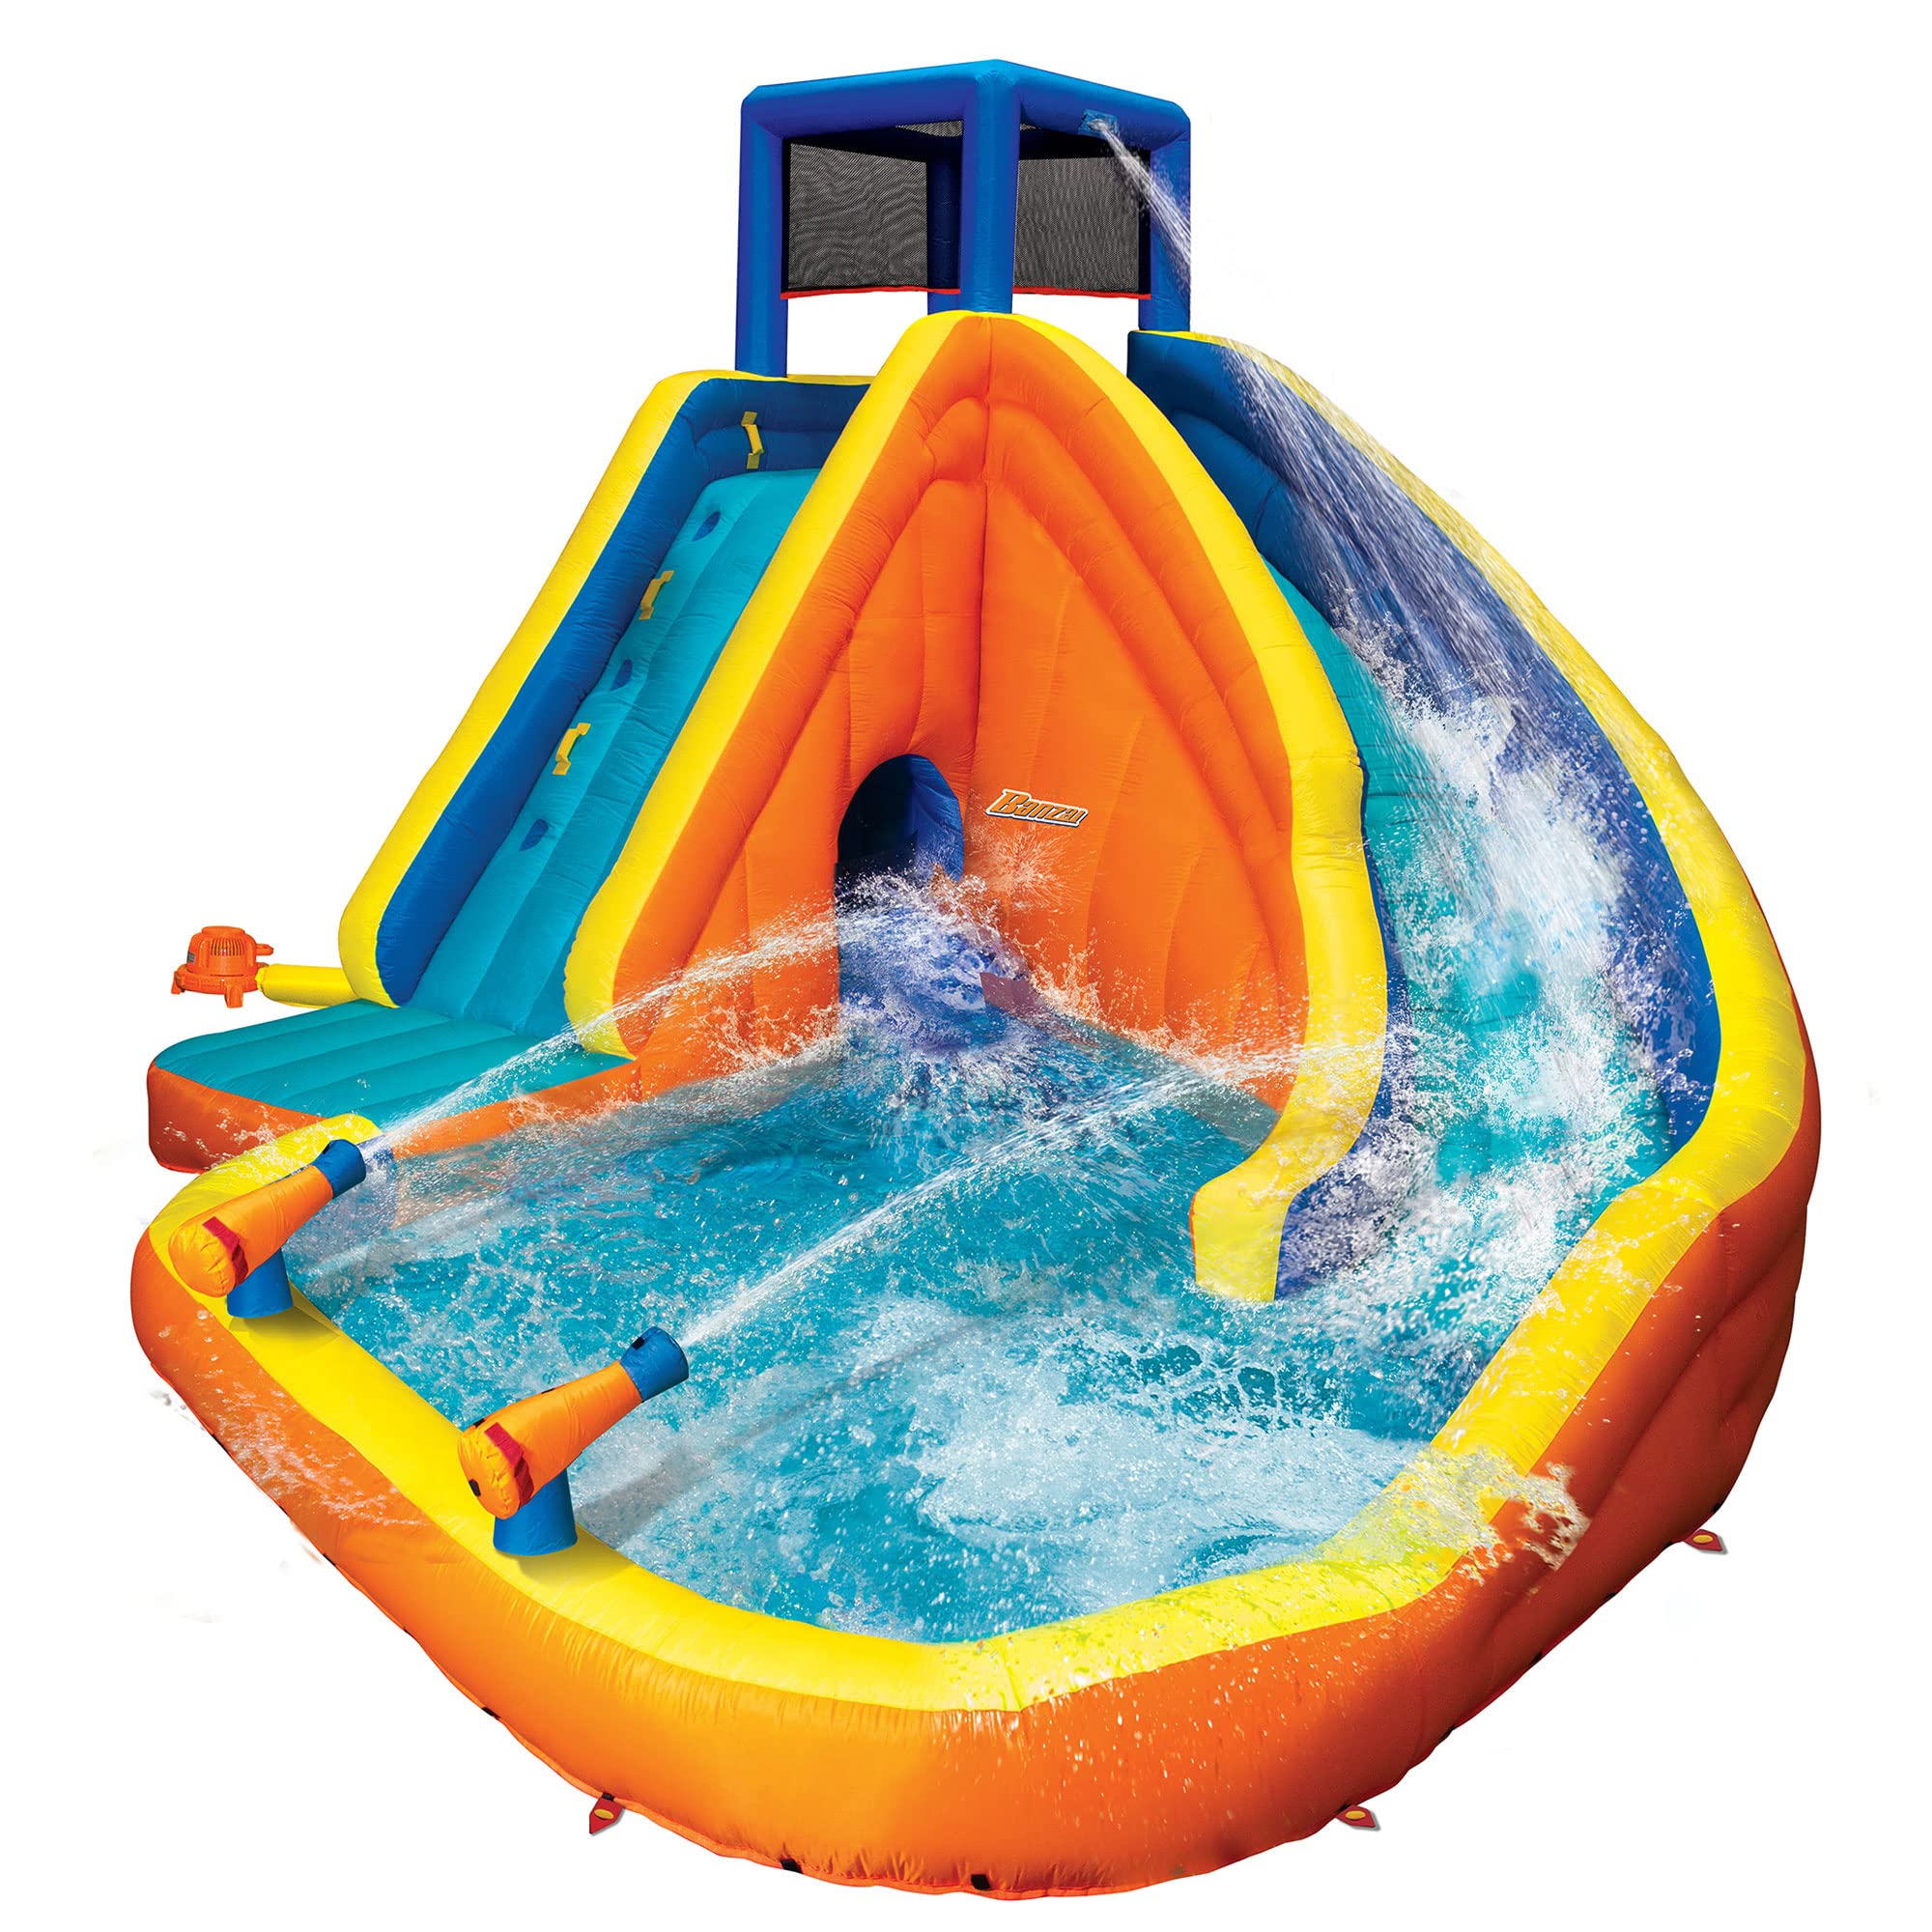 10' Tall BANZAI Sidewinder Falls Inflatable Kids Water Park Swim Splash Pool w/ Slide, Clubhouse, Climbing Wall, & Built-in Water Cannons $315 + Free Shipping